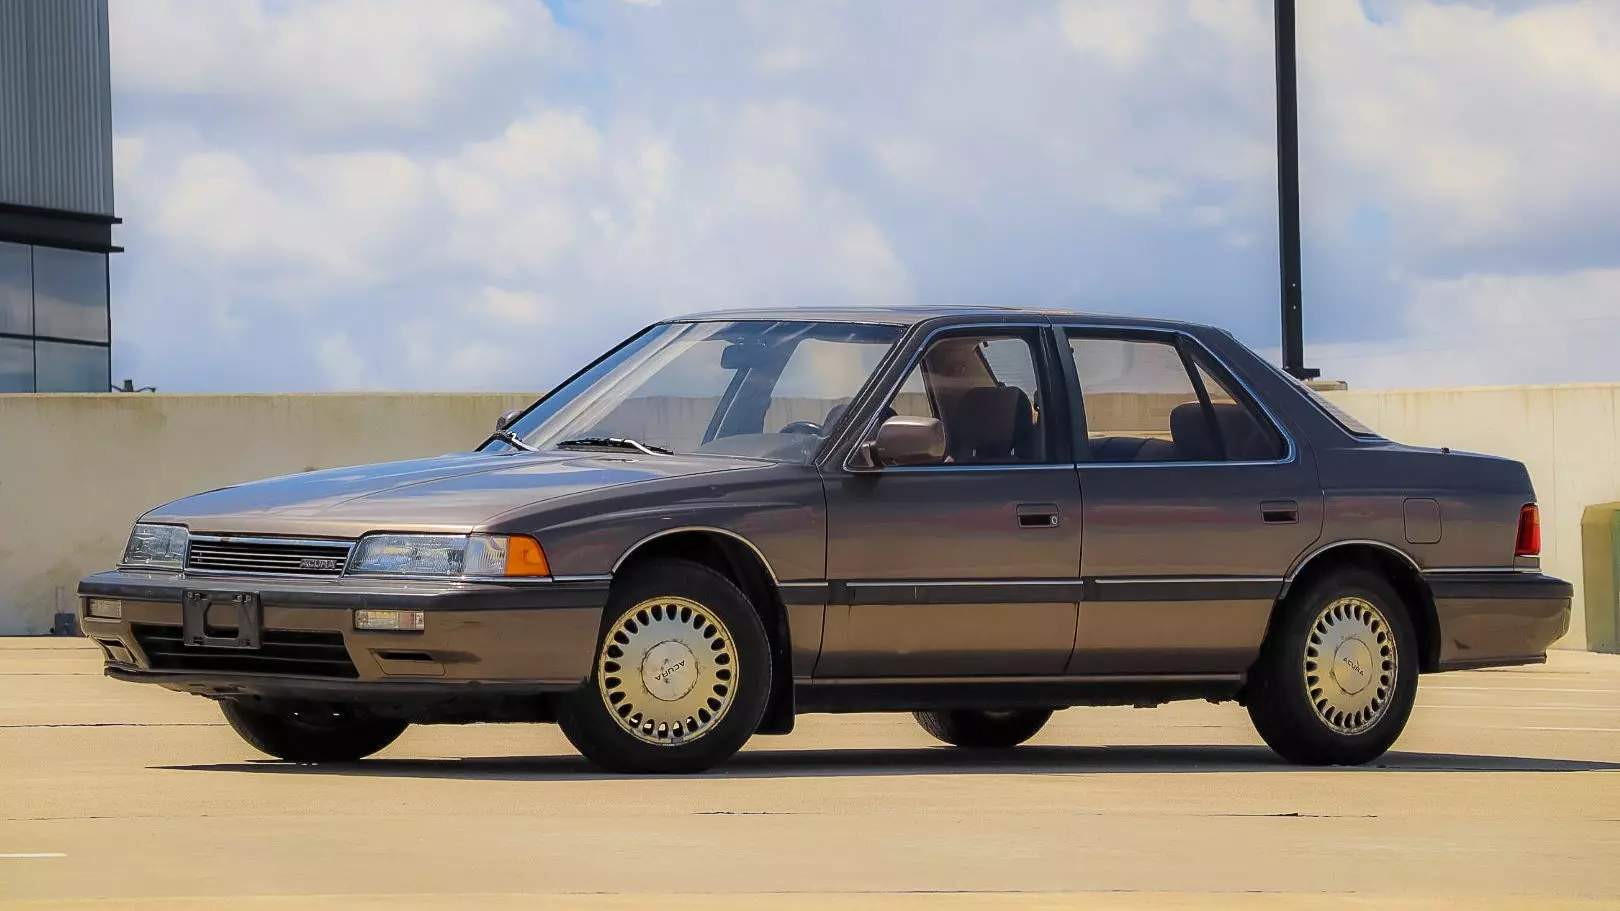 This 1990 Acura Legend Got Abandoned at My House and Became a Community Car